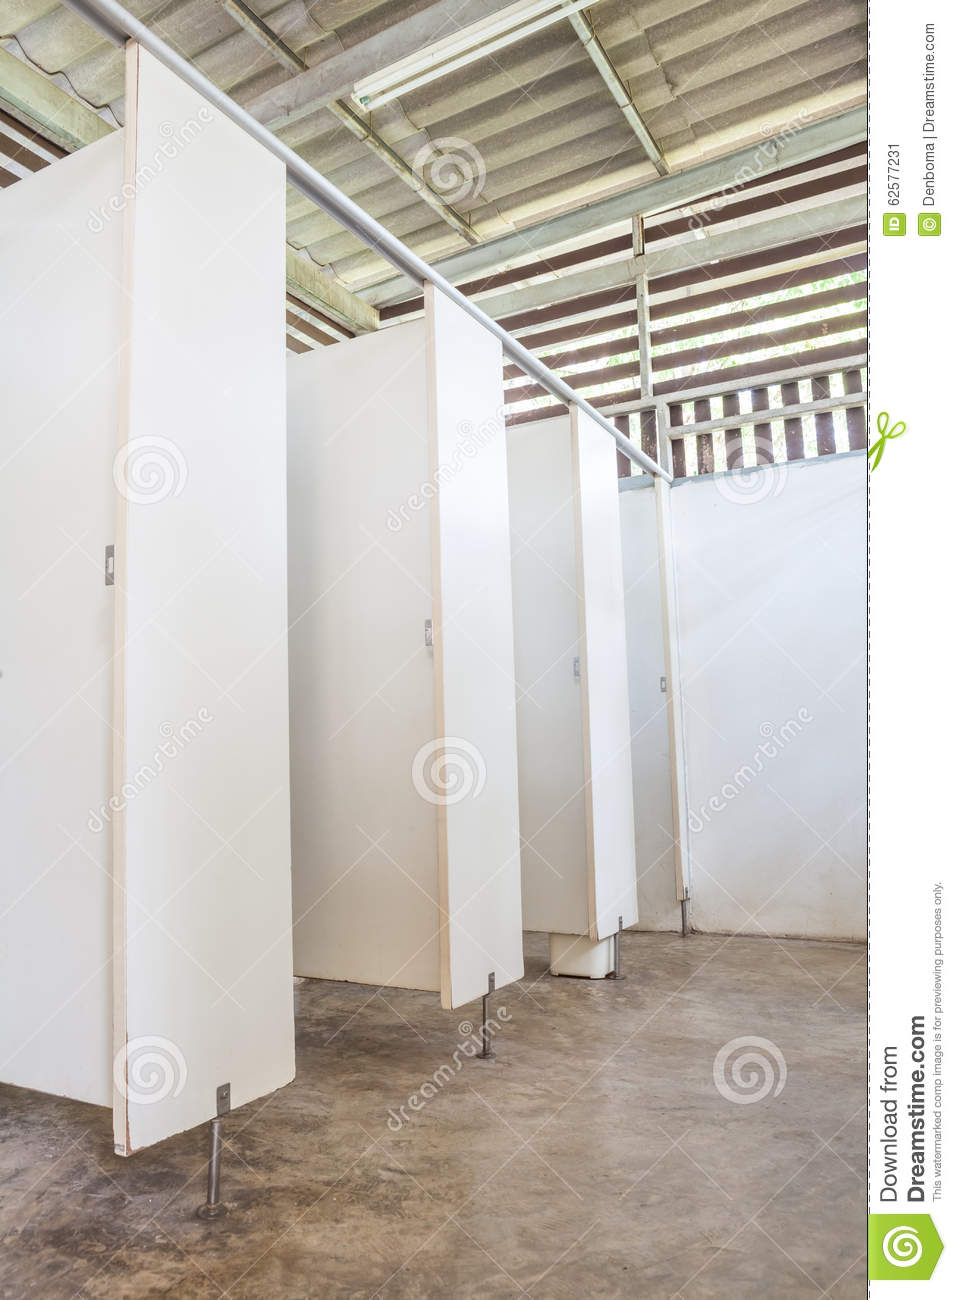 In An Public Building Are Womans Toilets Whit White Doors Mr No Pr No    